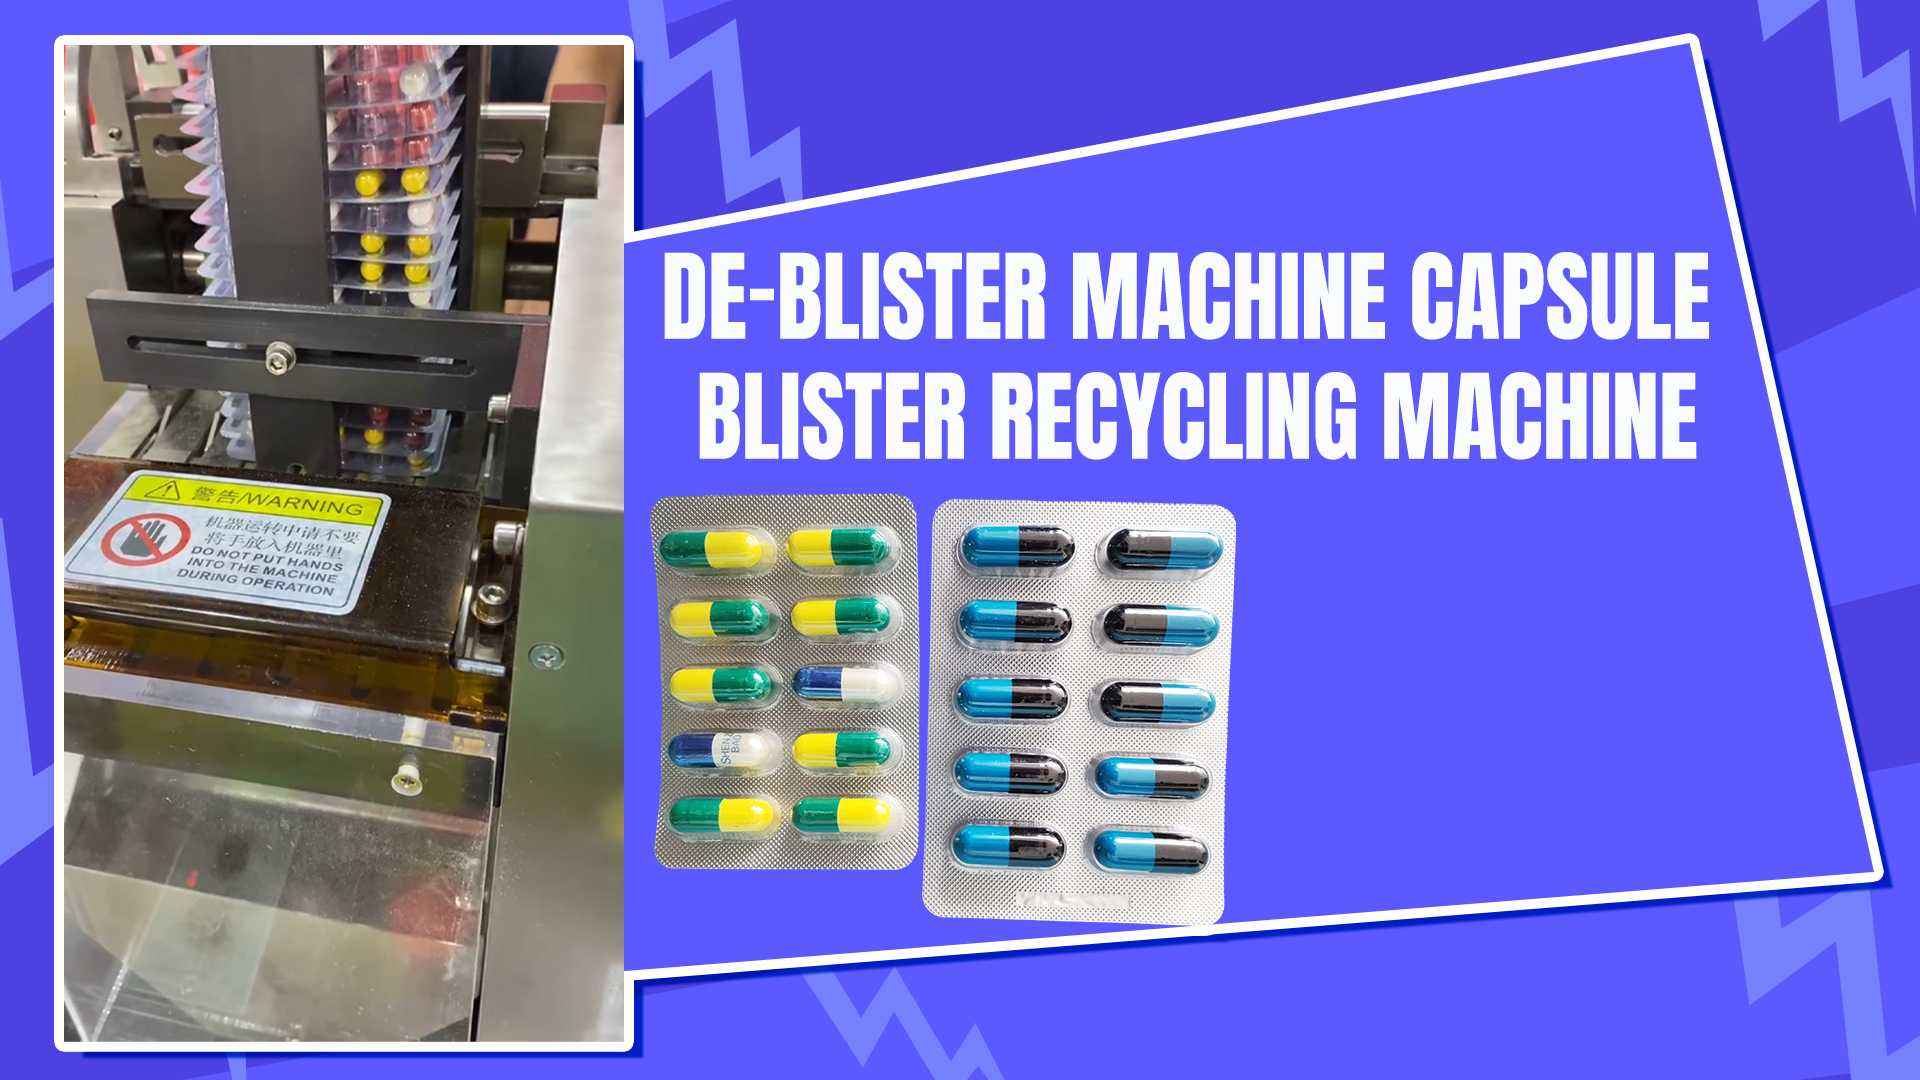 How To Recycle Medication blister packs